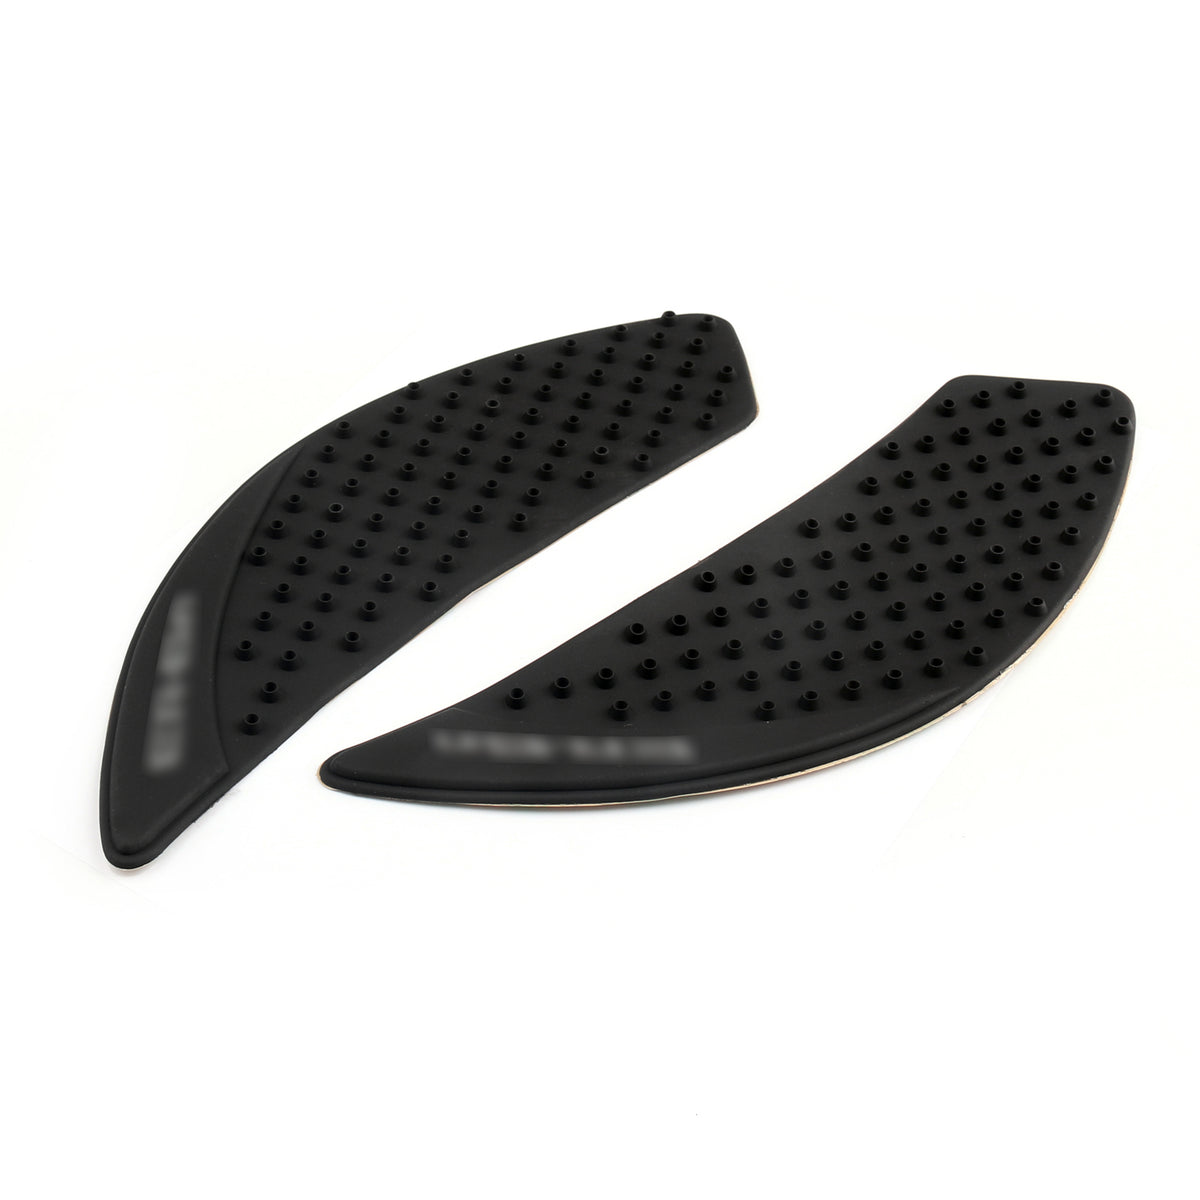 Tank Pad Traction Grip Protector 2-Piece Fit for Kawasaki ER650 ER-6N 06-15